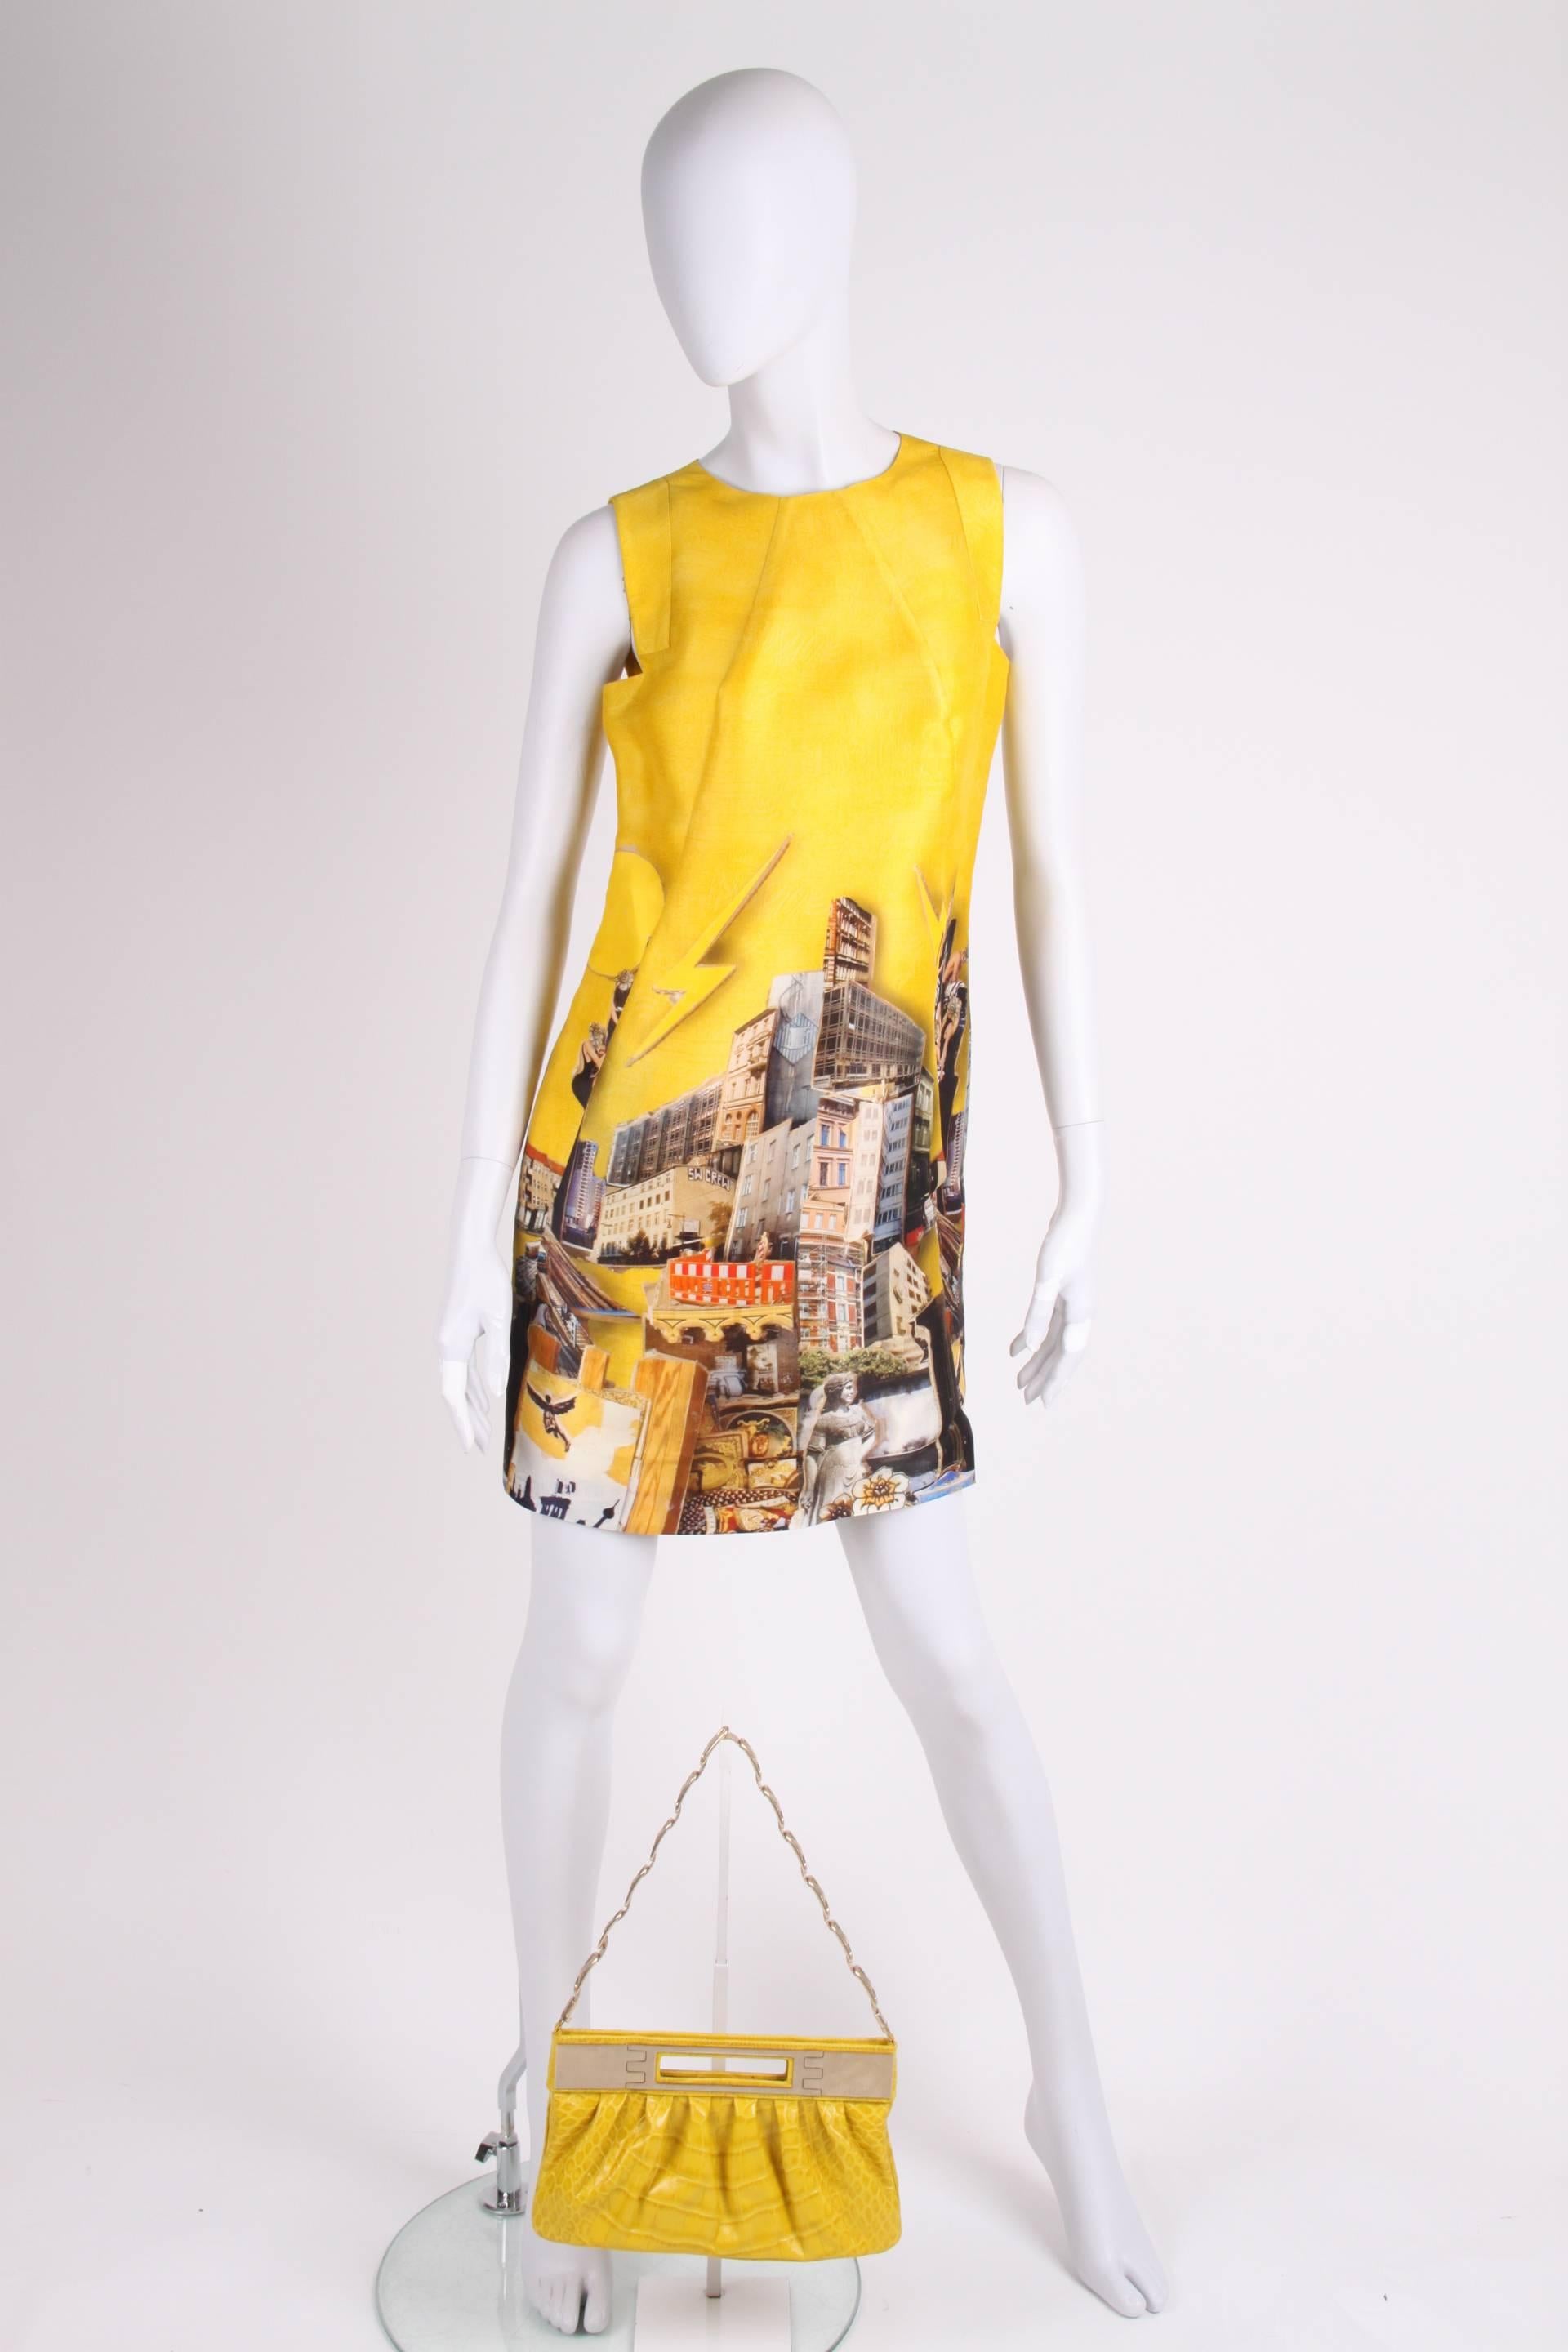 This Versace dress from the fall/winter collection of 2008 was designed by a very special couple: Donatella Versace and the Dutch artist Tim Roeloffs. Highly collectable!

The beautiful and colourful print is based on images of Berlin, the main